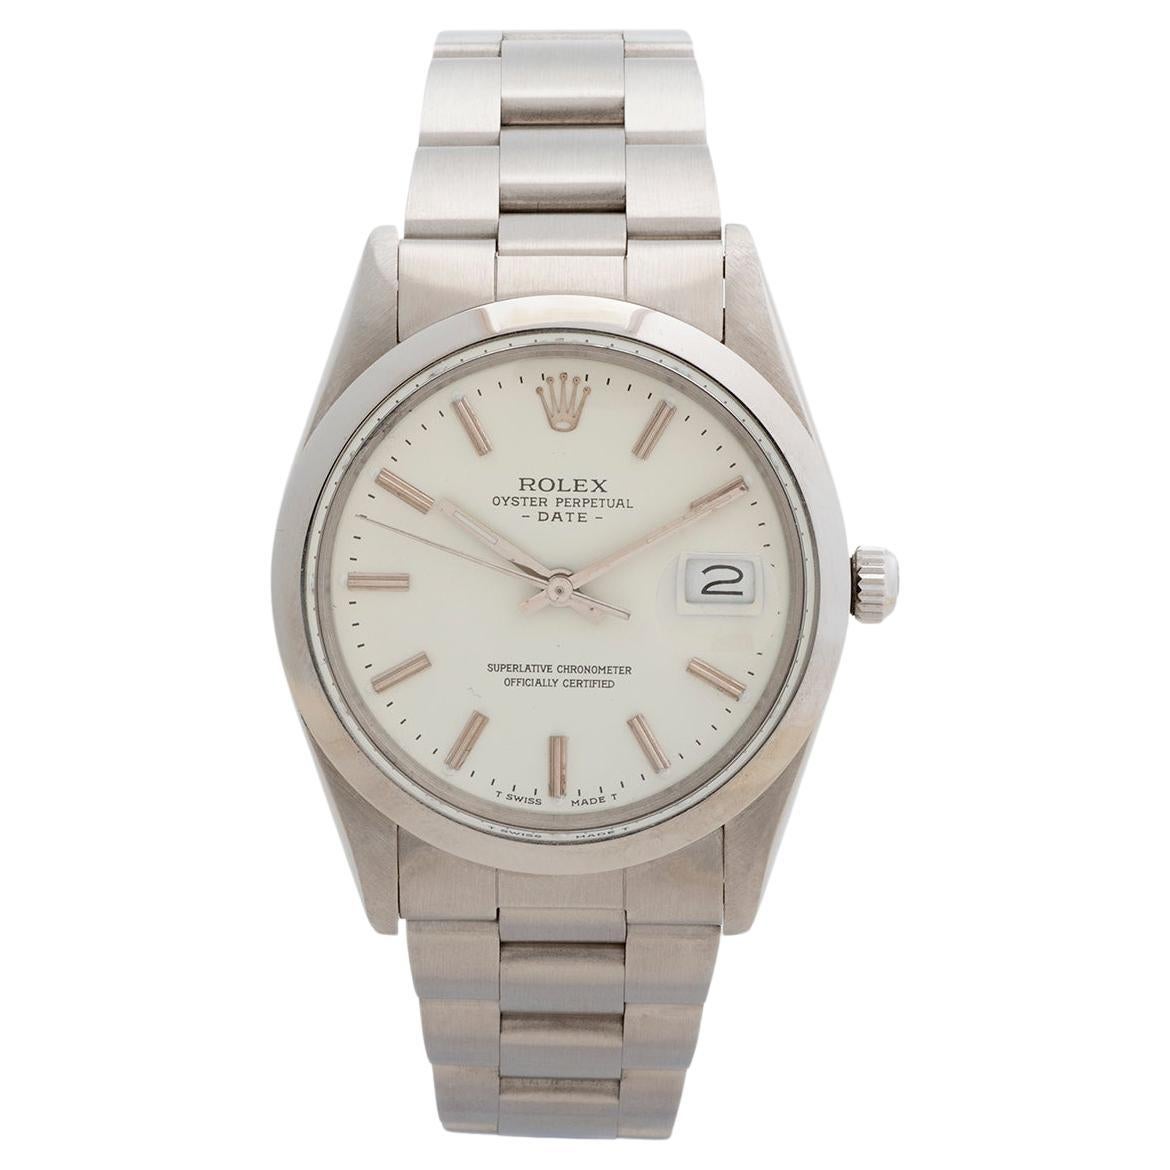 Rolex Date Ref 15000 Wristwatch. Oyster Dial, White Baton Dial. Year c.1982